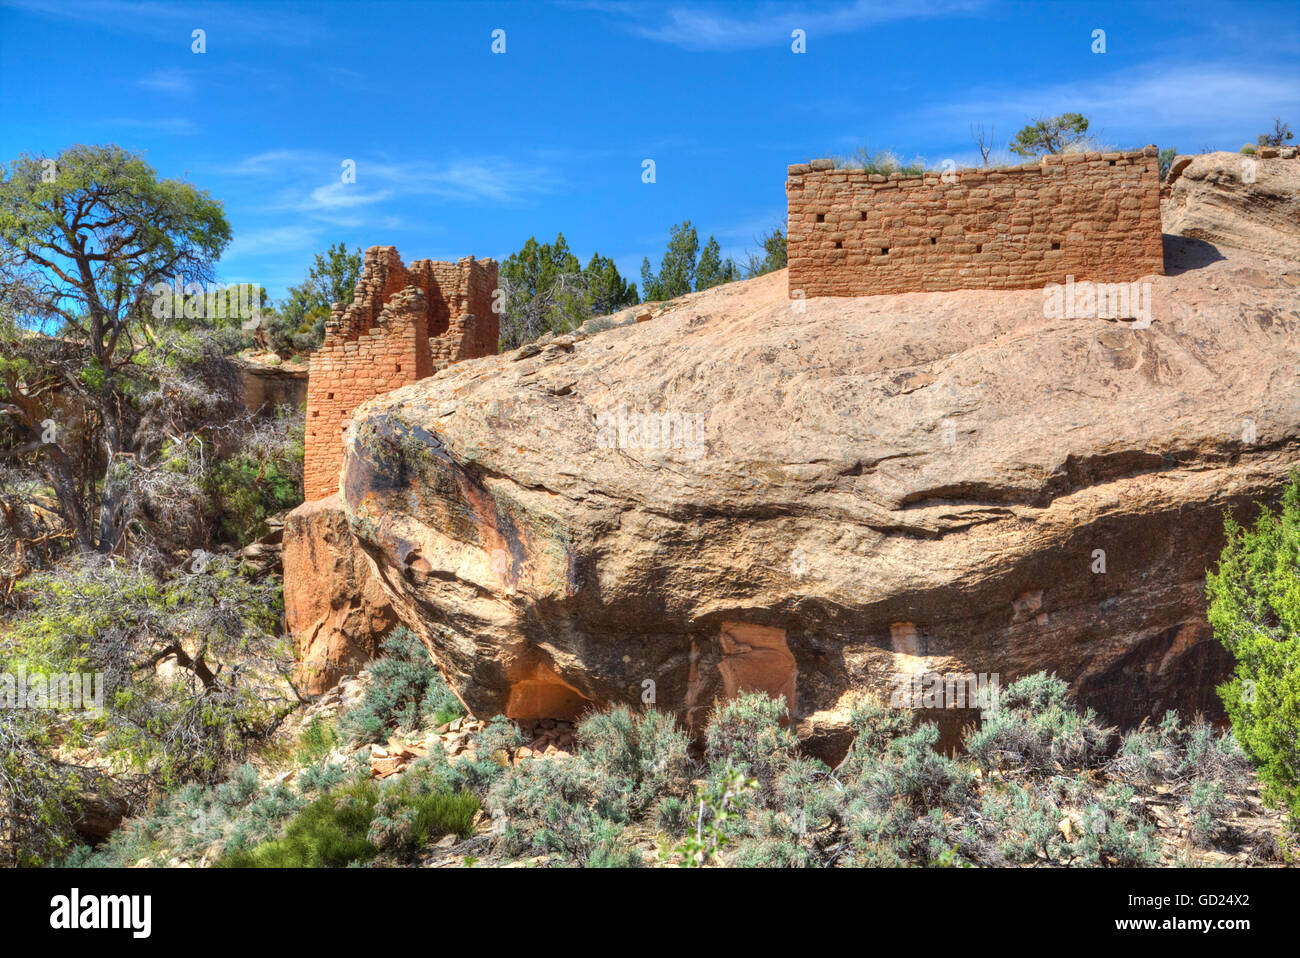 Ruins of Ancestral Puebloans, dating from between 900 AD and 1200 AD, Holly Group, Hovenweep National Monument, Utah, USA Stock Photo